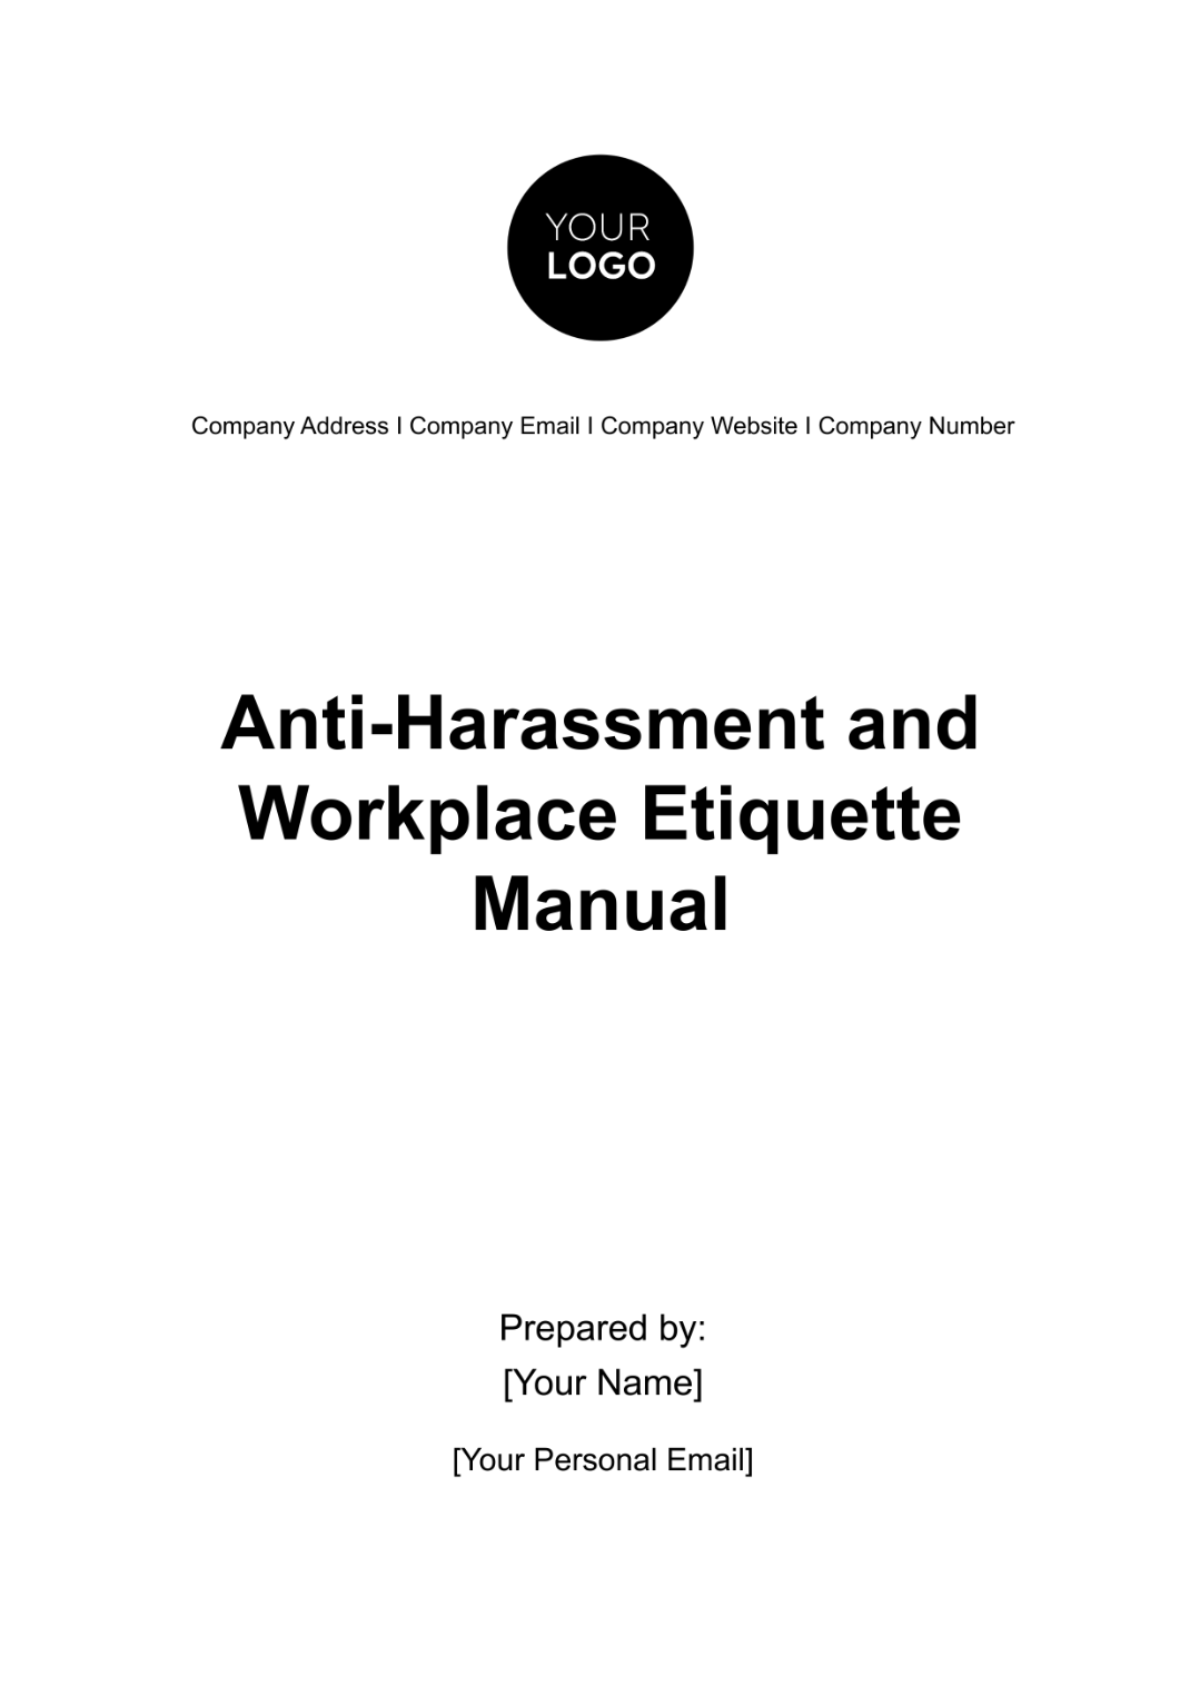 Free Anti-Harassment and Workplace Etiquette Manual HR Template